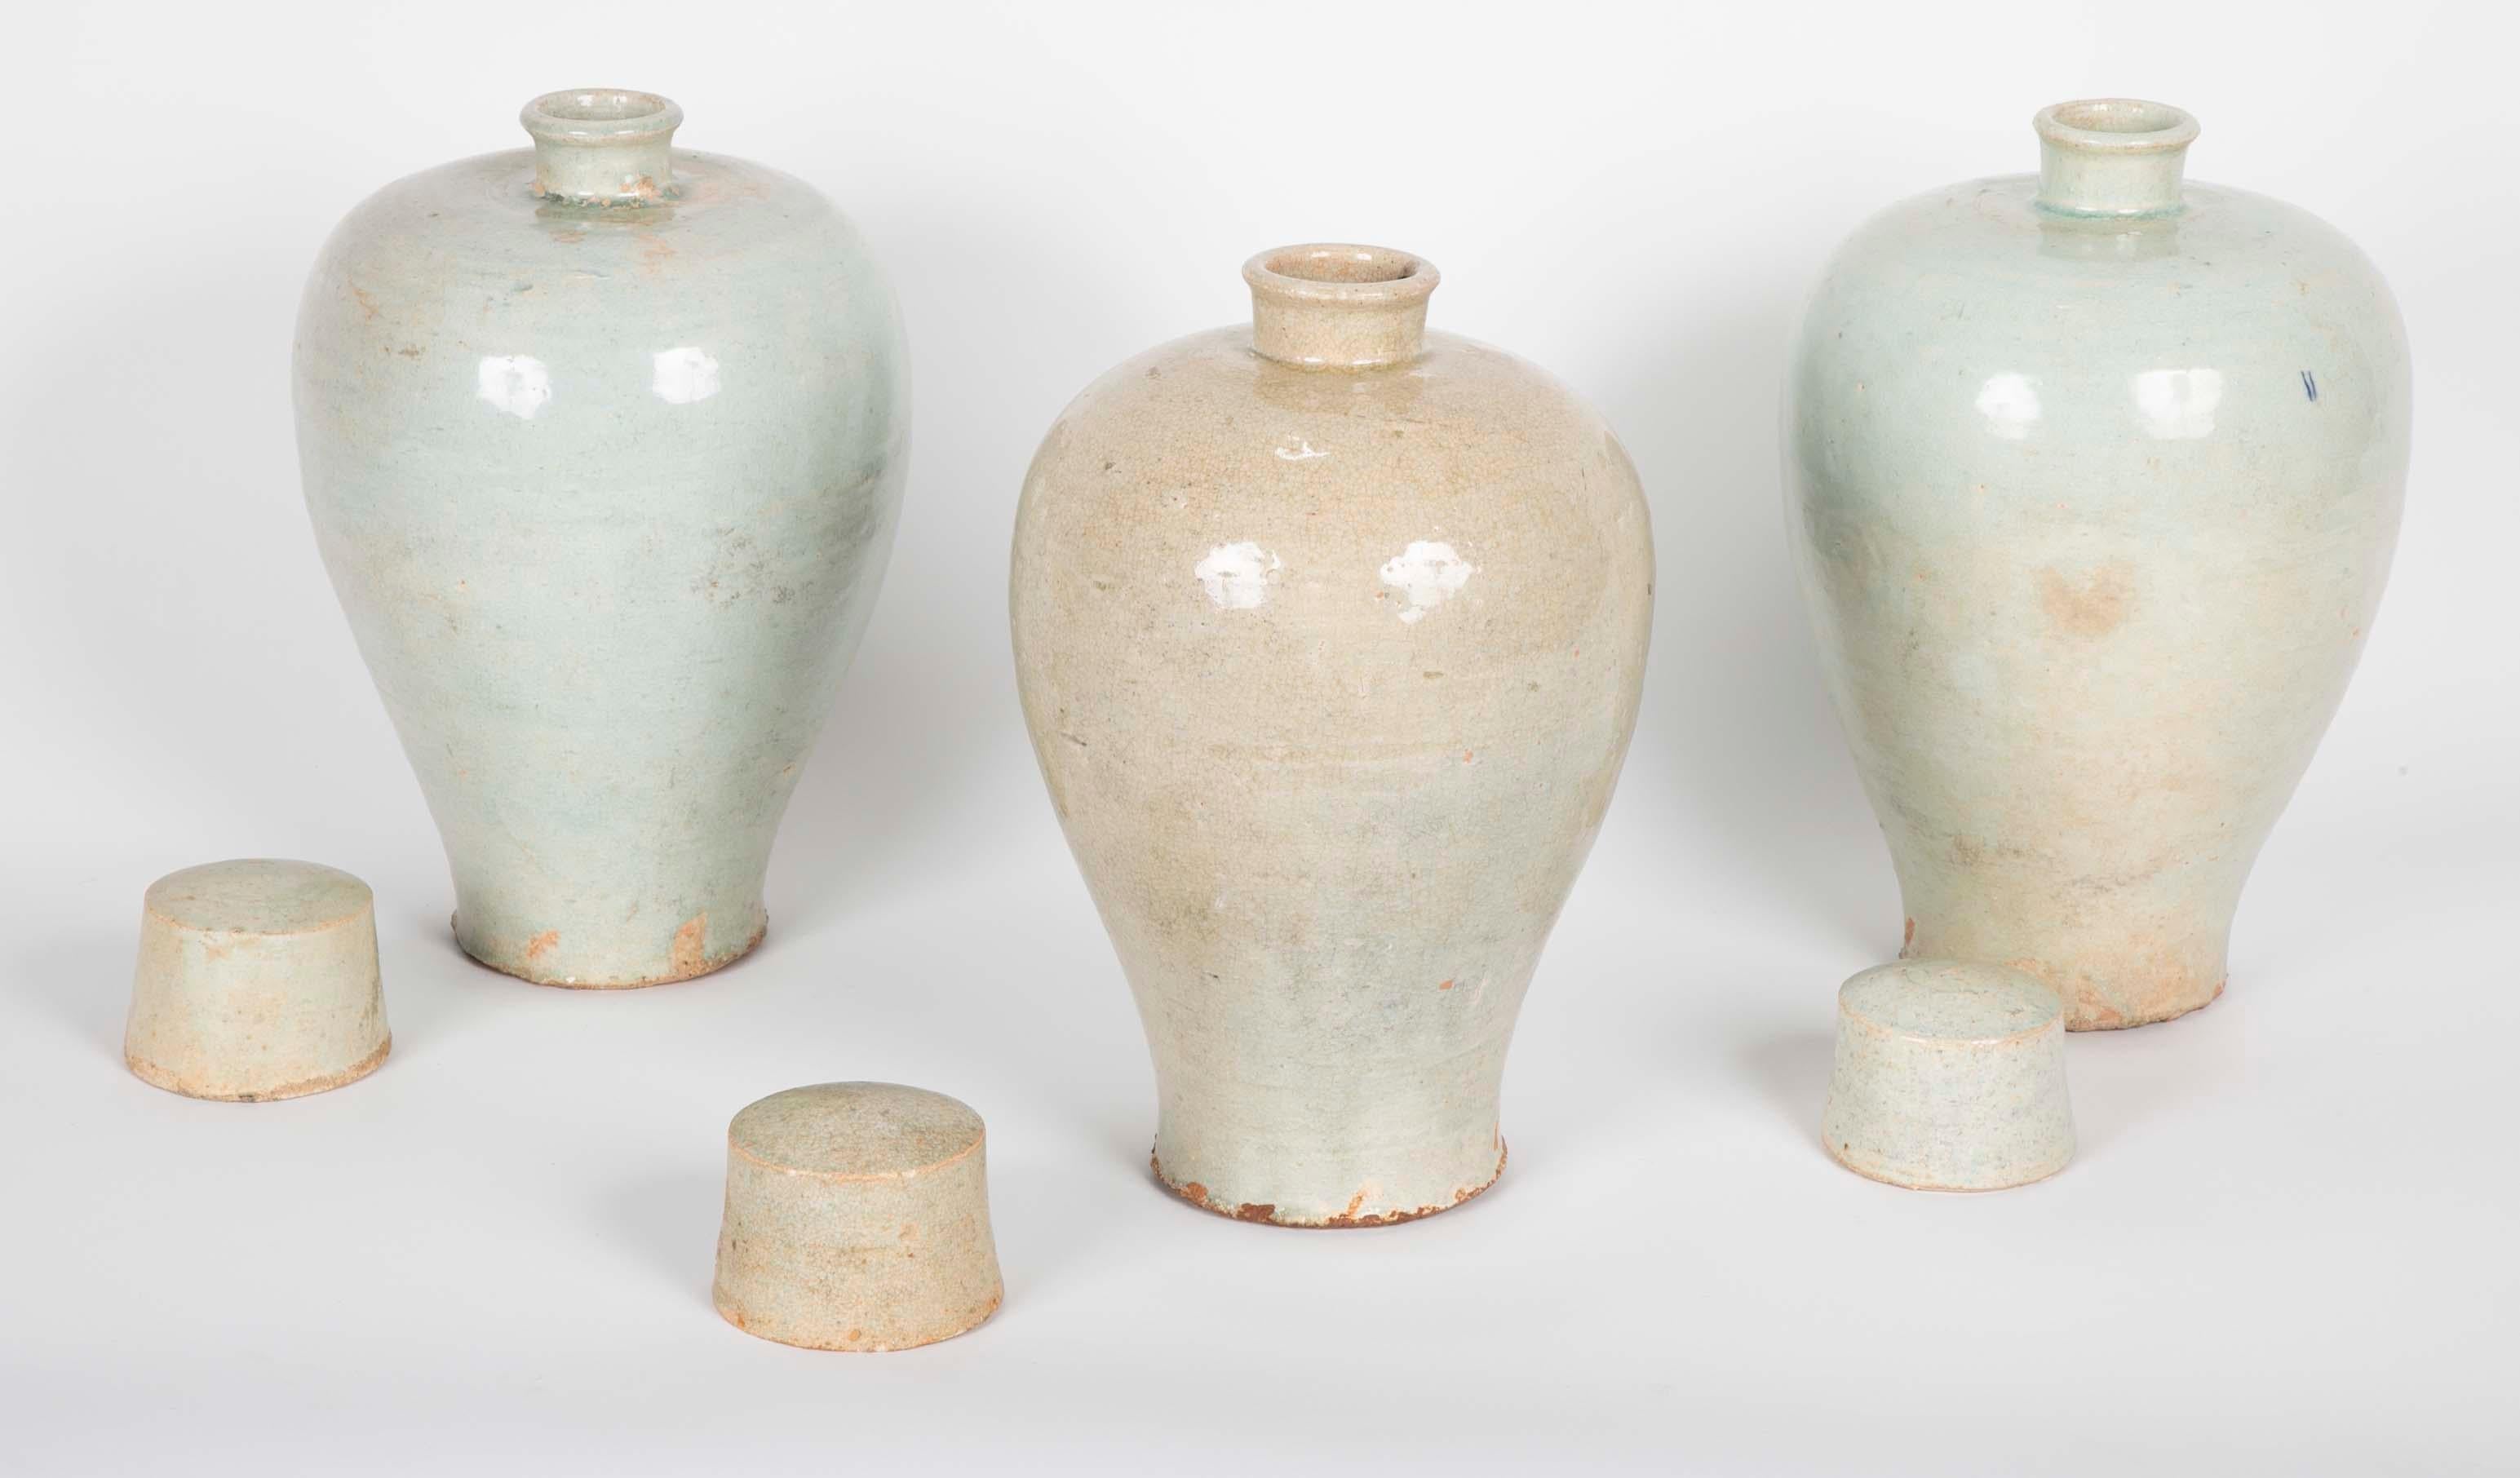 Three Qingbai glazed porcelain covered vases of ovoid form with pale blue glaze. Yuan Dynasty ( 1279 - 1368 ).